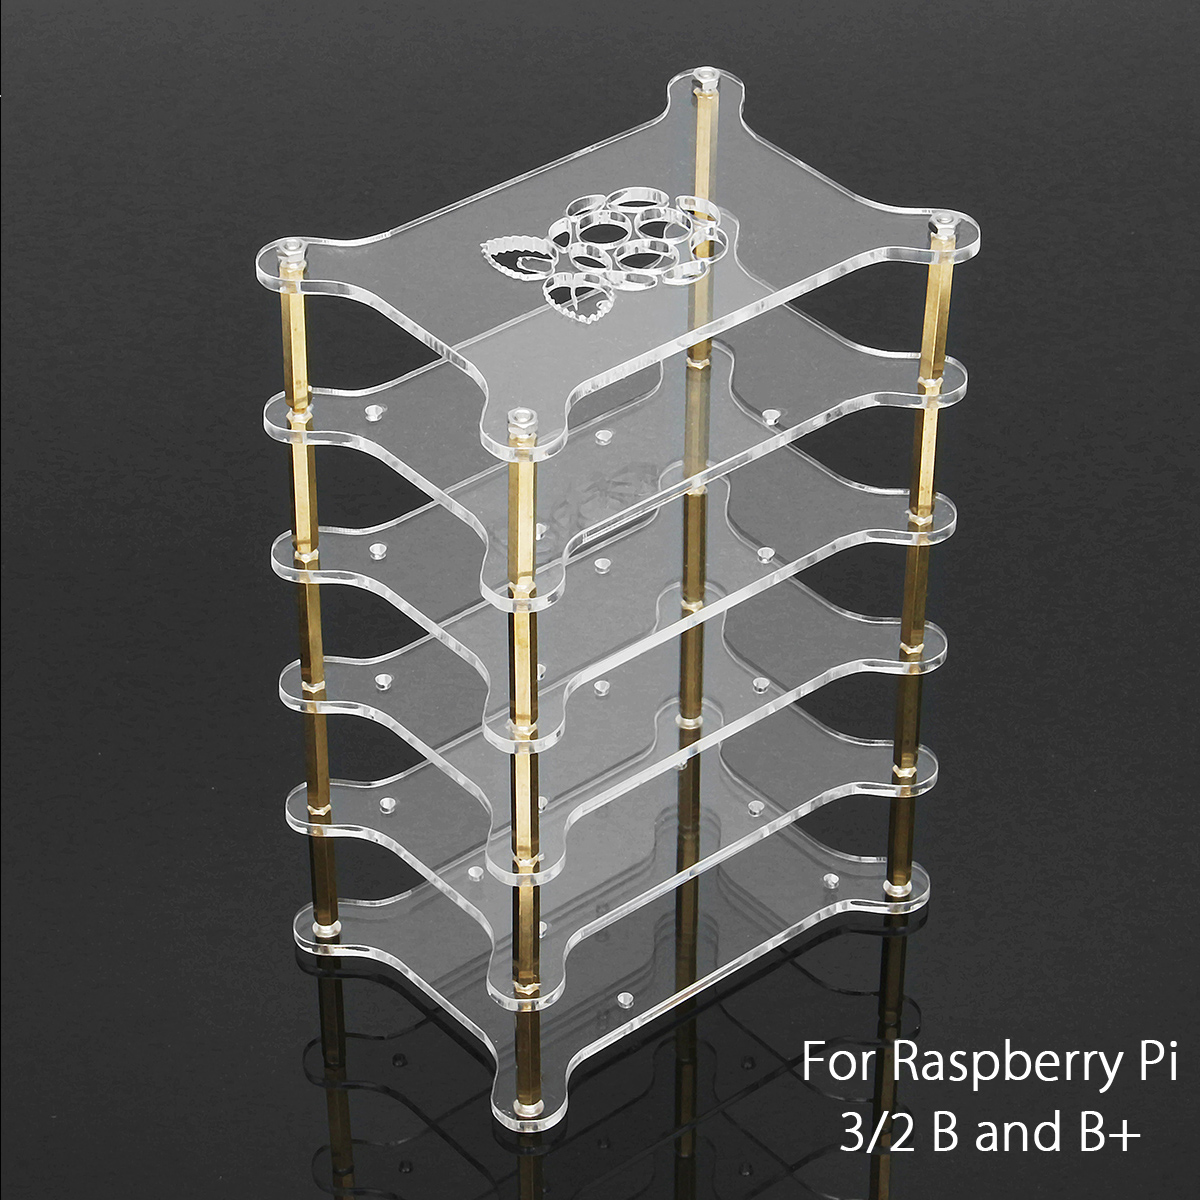 Clear Acrylic 5 Layer Cluster Case Shelf Stack For Raspberry Pi 3/2 B and B+ 102